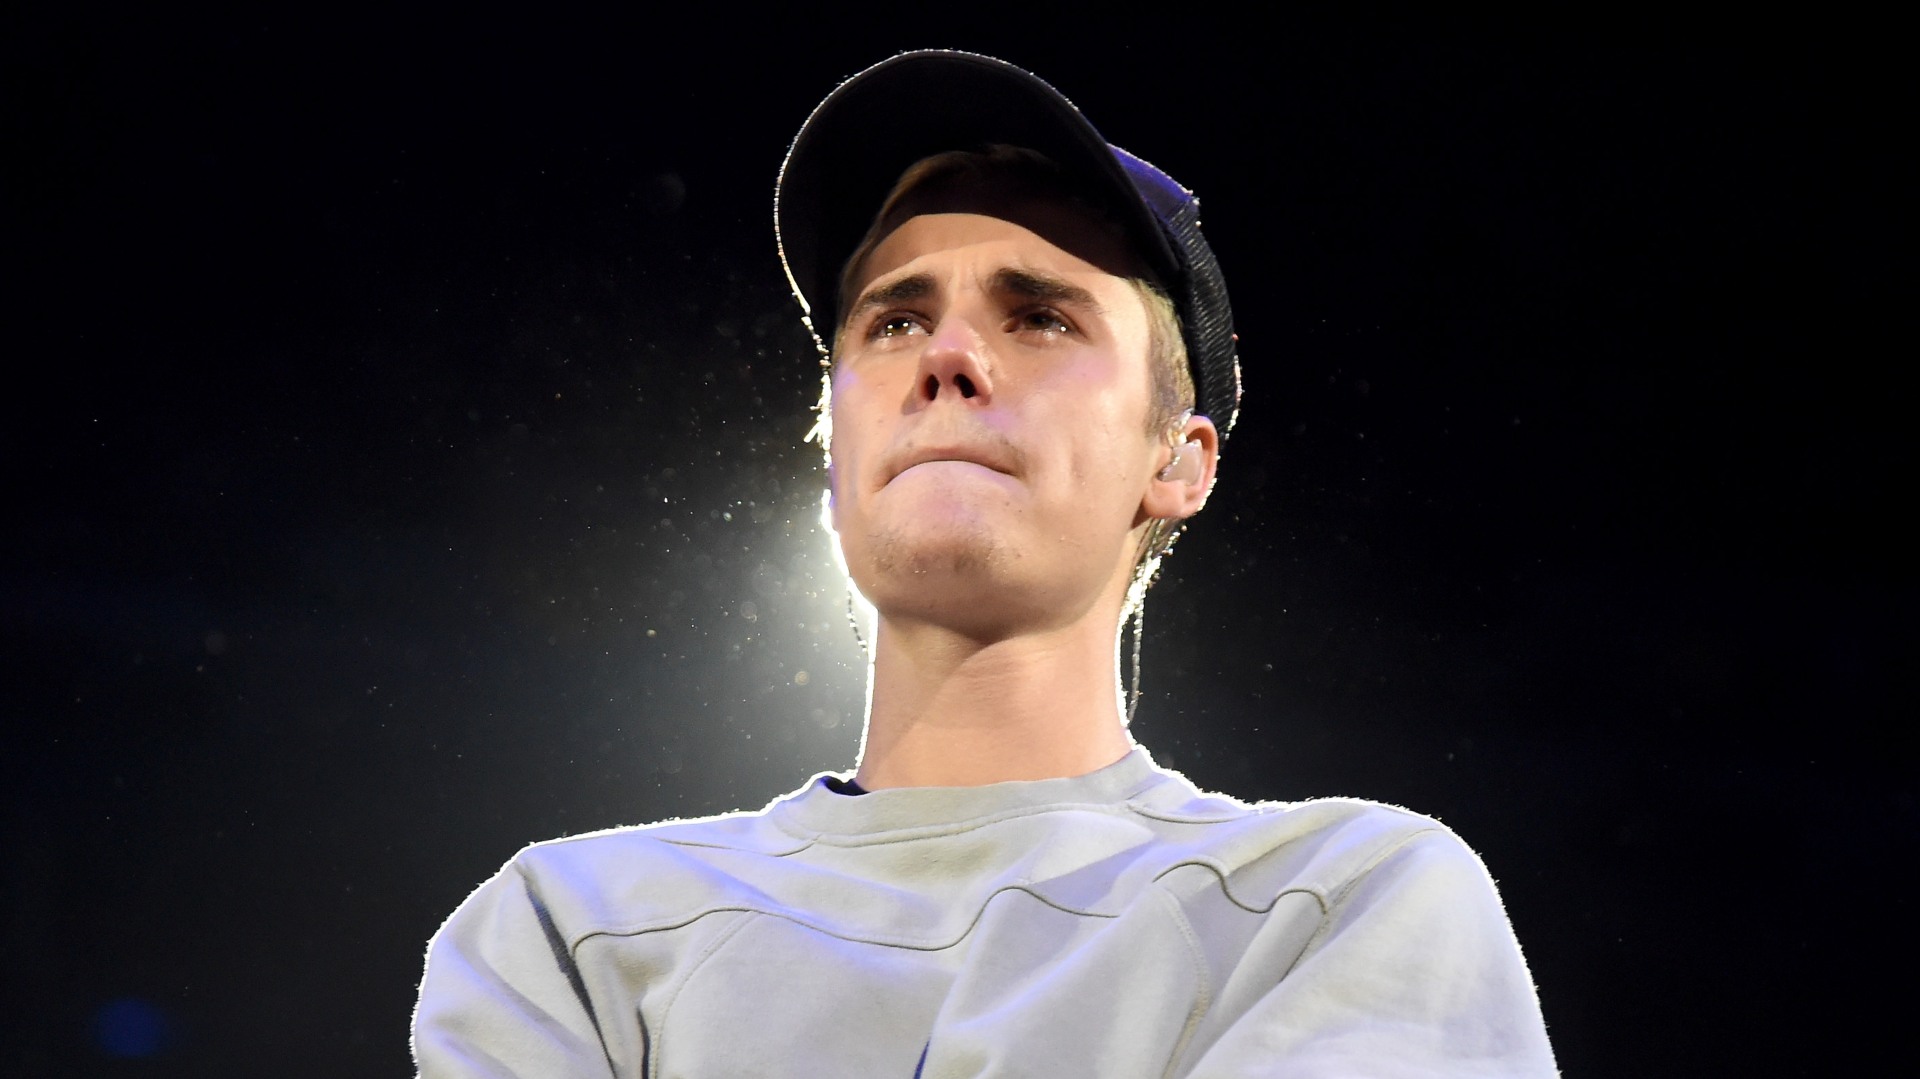 Justin Bieber discovered he is related to two other famous Canadians